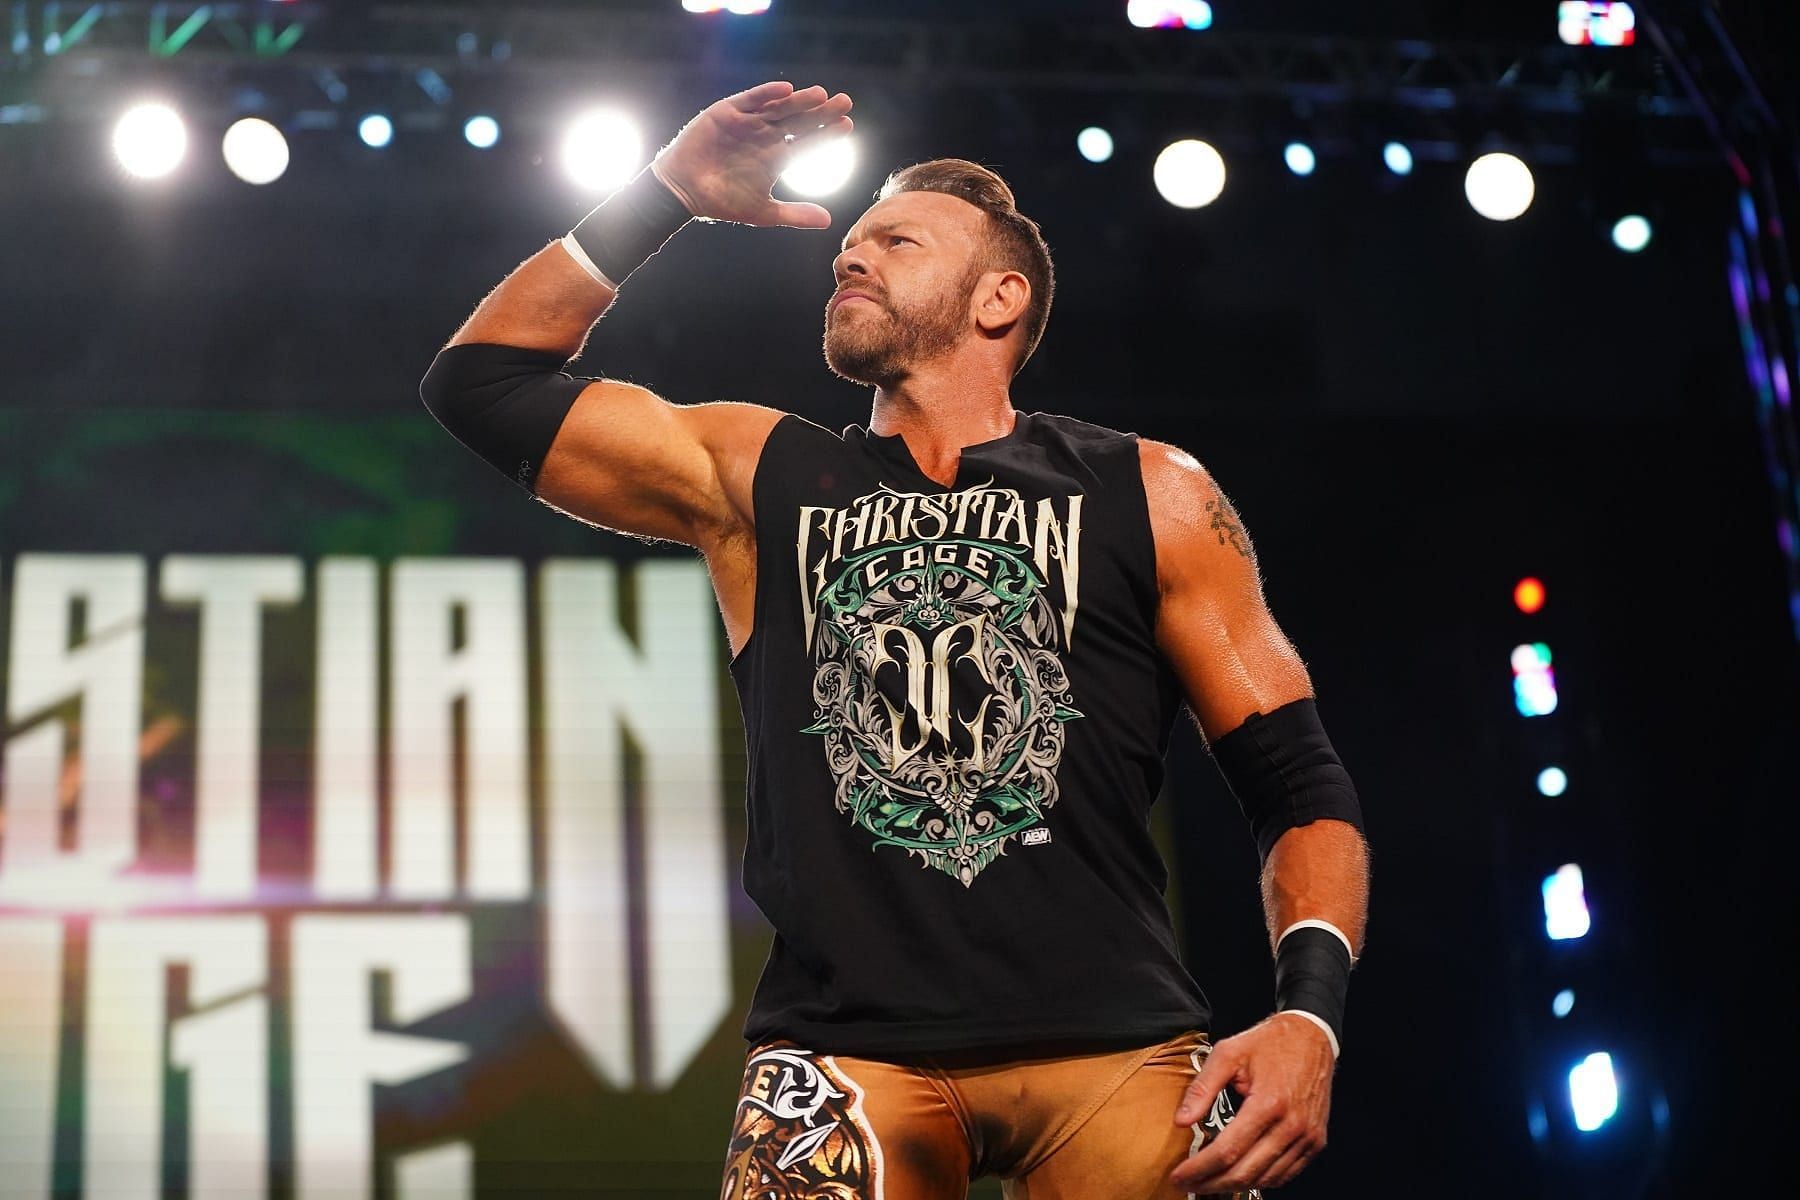 What&#039;s next for Christian Cage in AEW after turning heel?